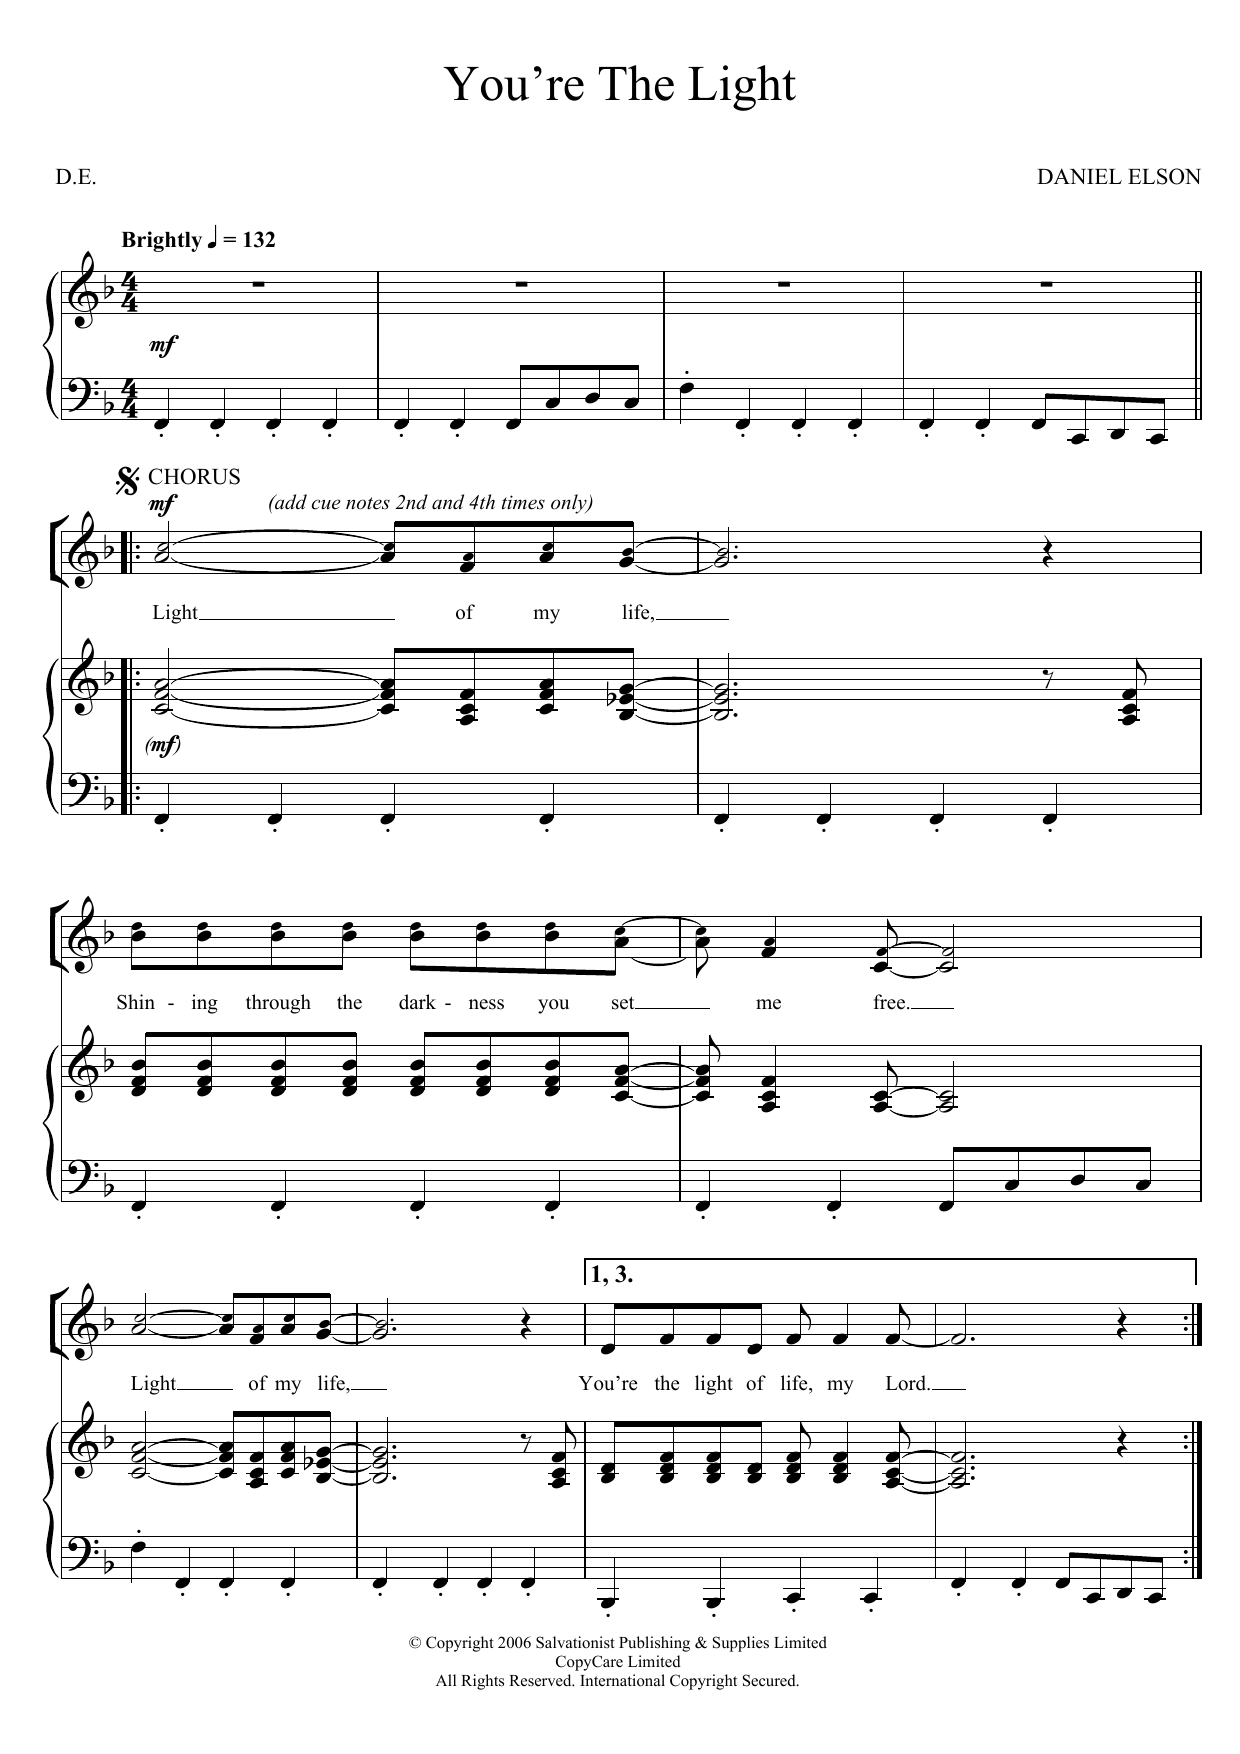 Download The Salvation Army You're The Light Sheet Music